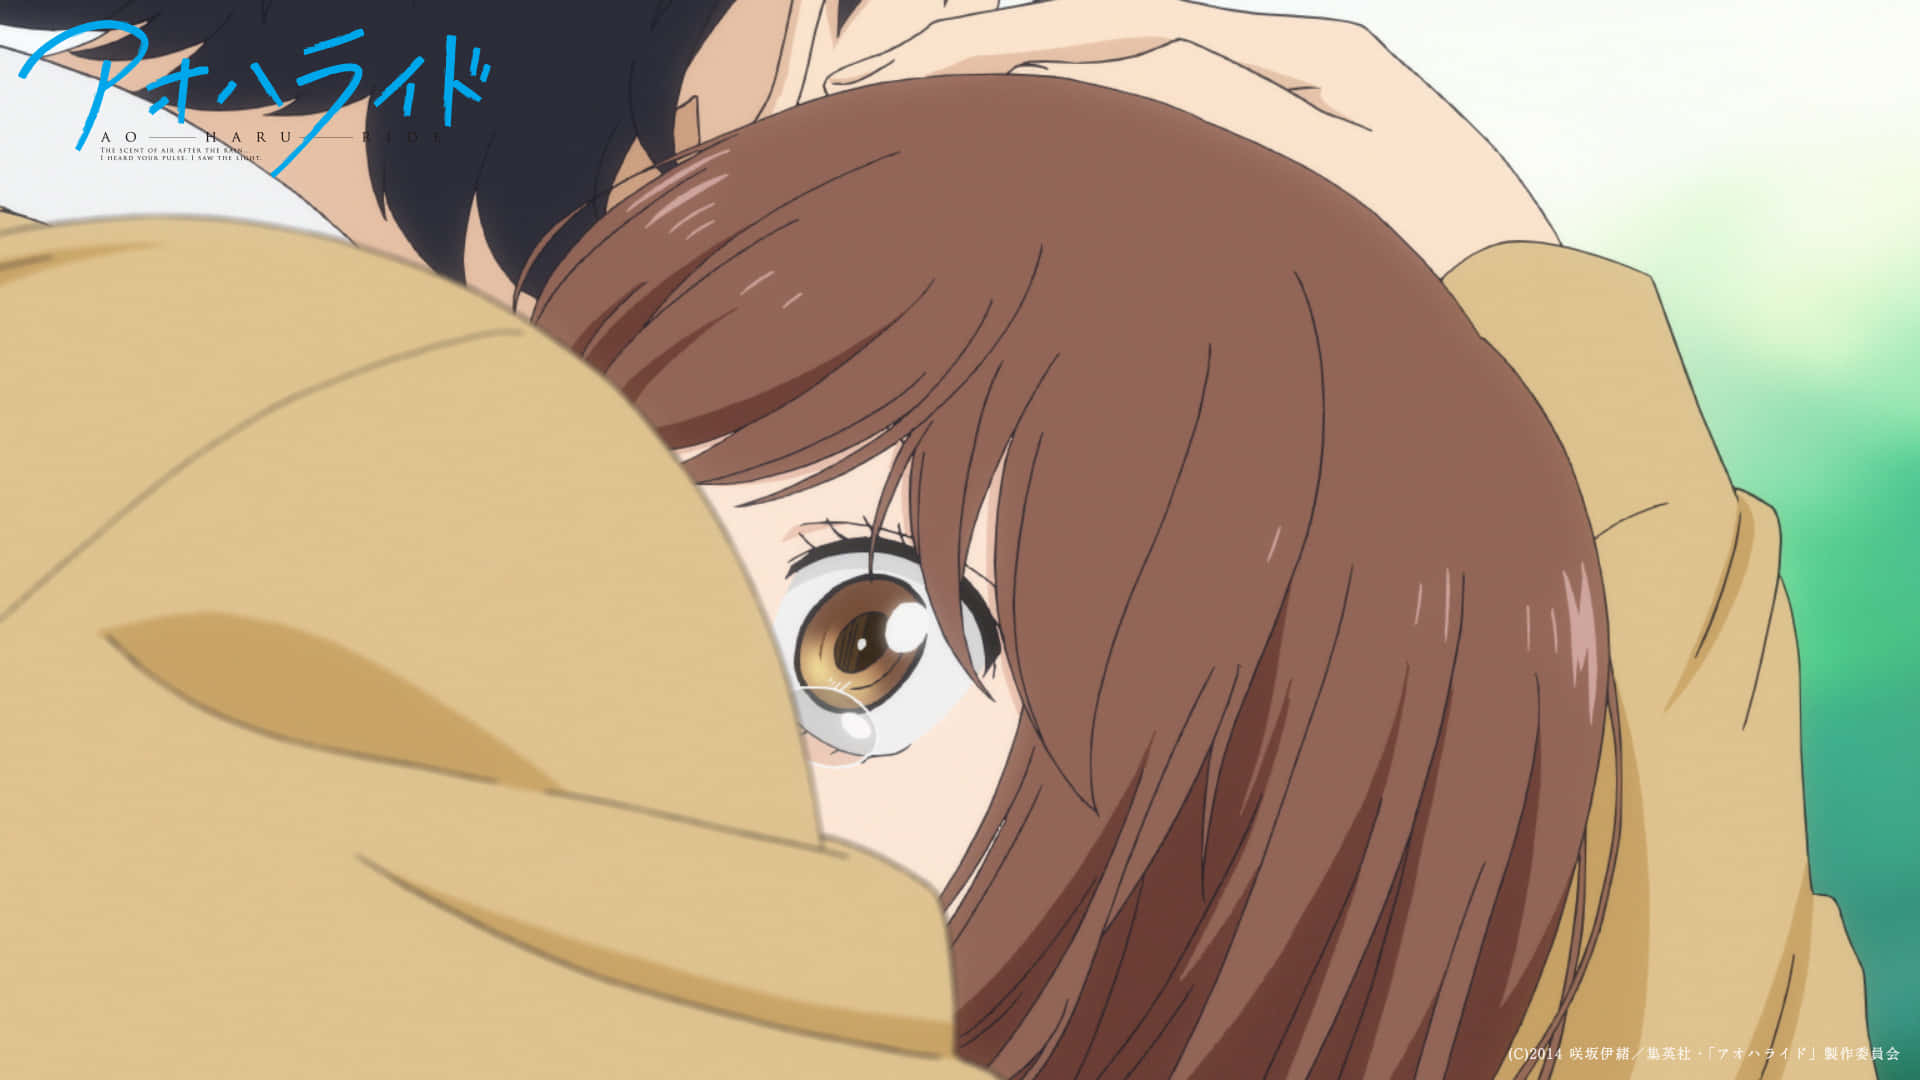 "Discovering the beauty of youth in Ao Haru Ride"